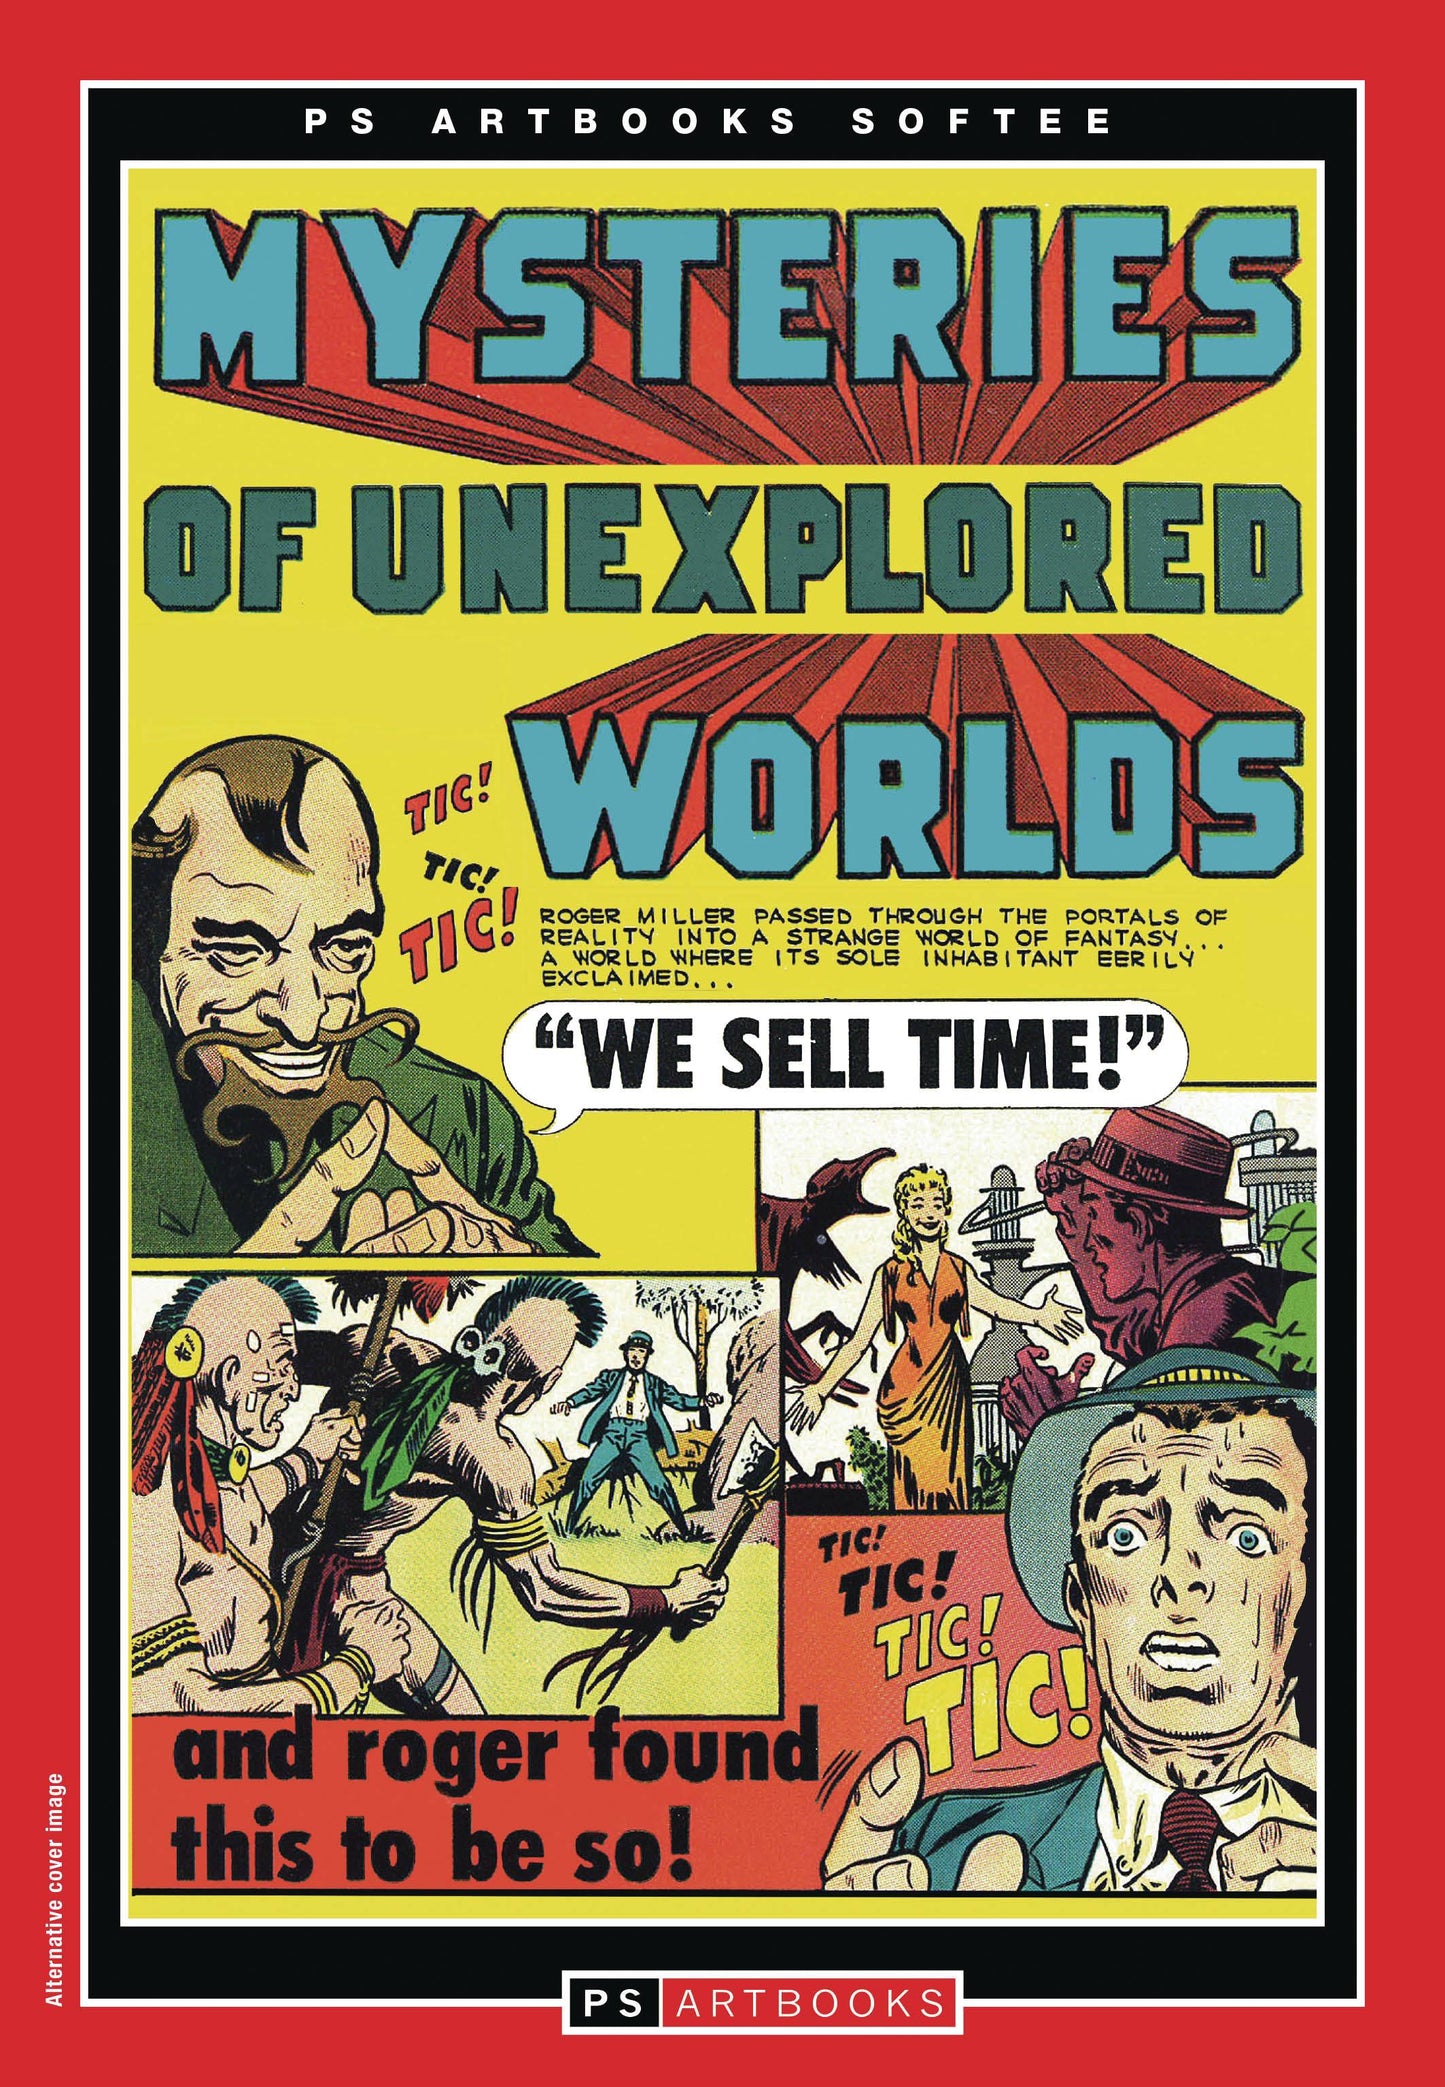 The One Stop Shop Comics & Games Silver Age Classics Mysteries Unexplored Worlds Softee Vol 0 (09/28/2022) PS ARTBOOKS